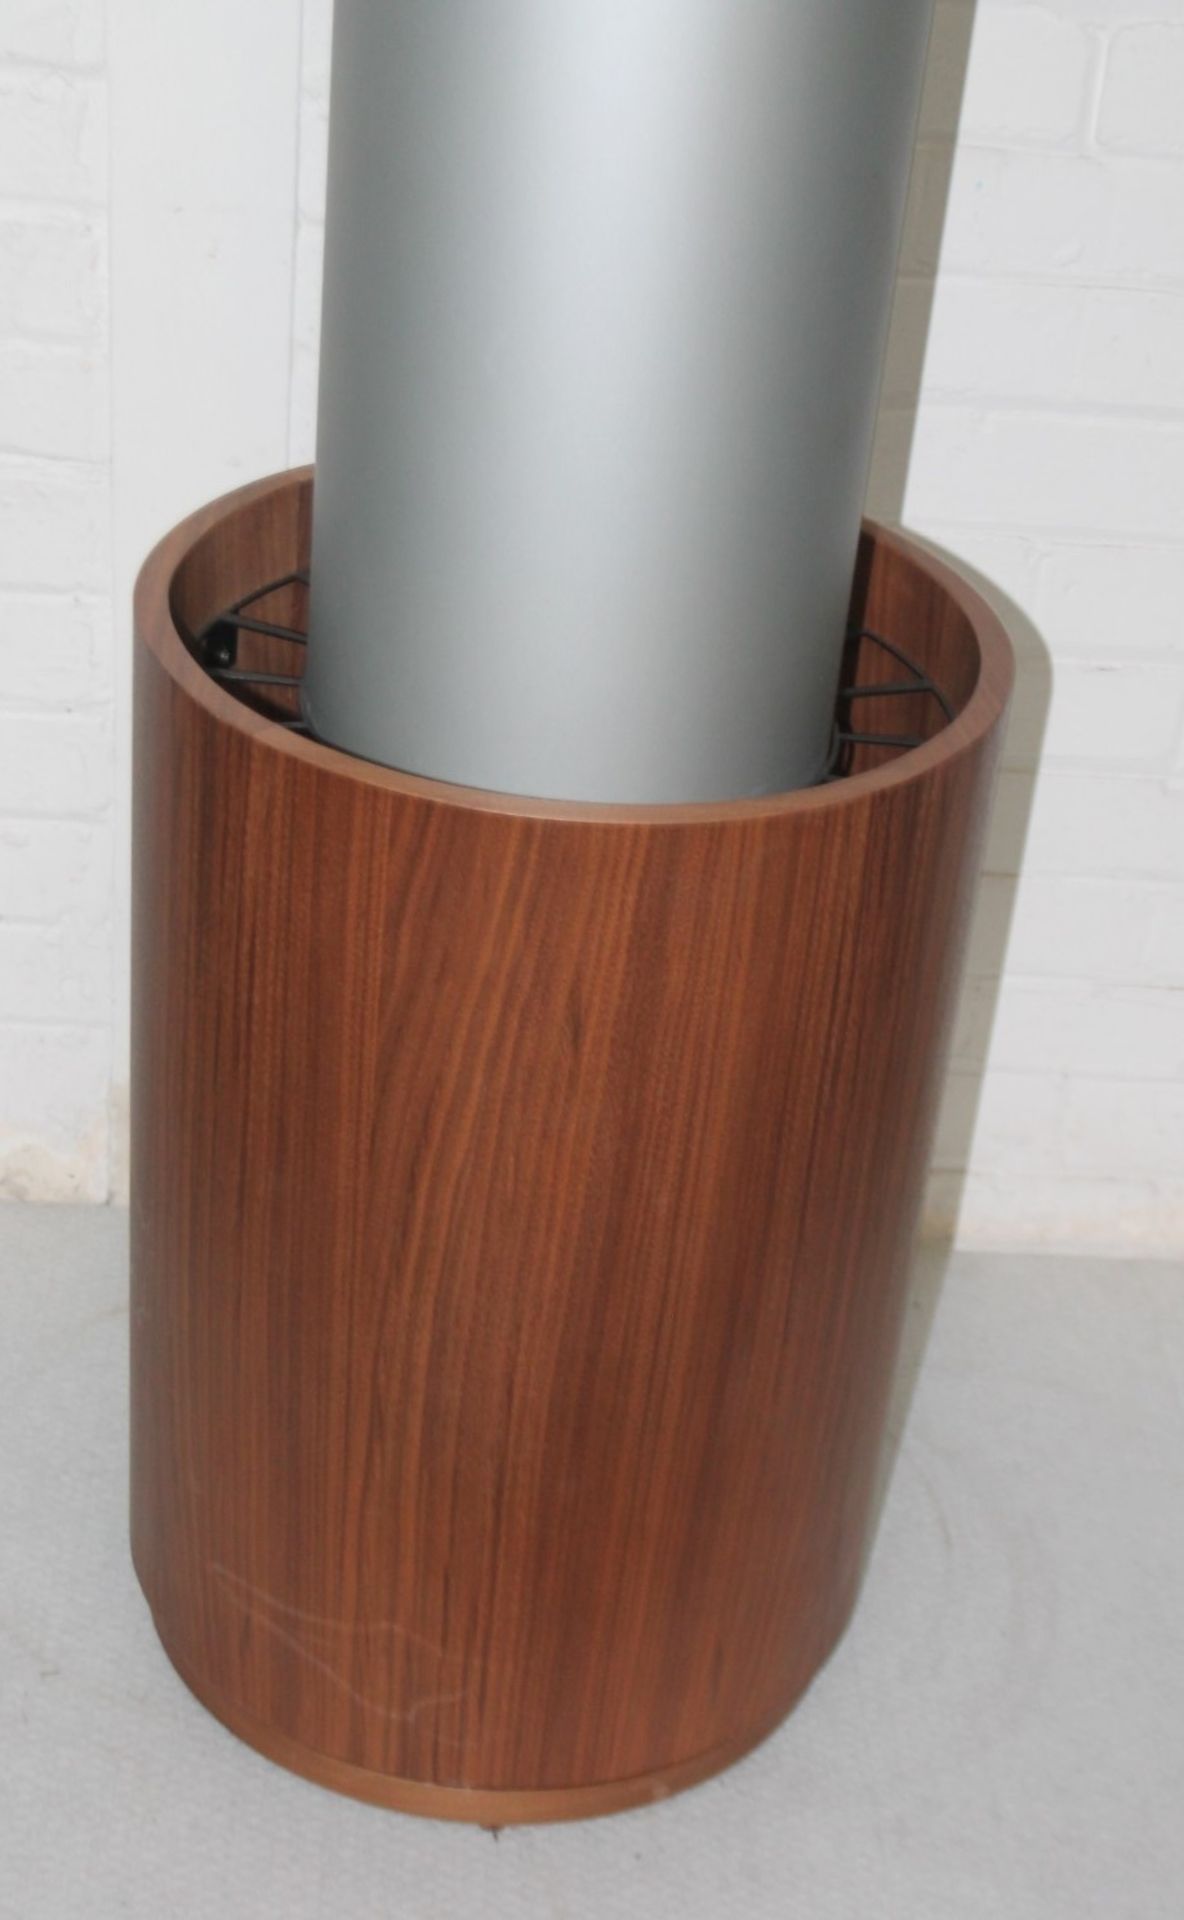 1 x Revolving Retail Display Stand - Dimensions: Height 151cm / Diameter 40cm - Ex-Showroom - Image 3 of 6